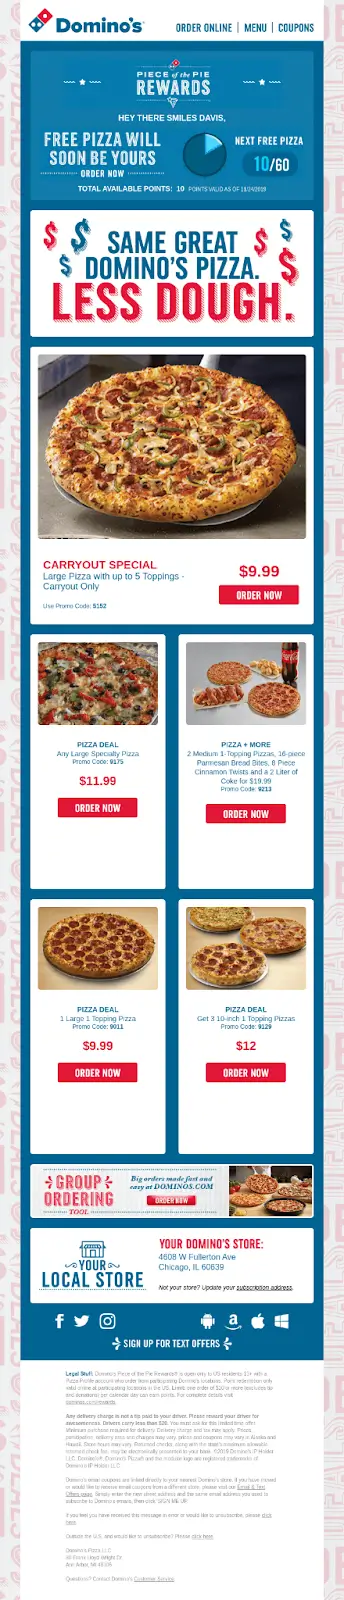 Dominos data driven sales page